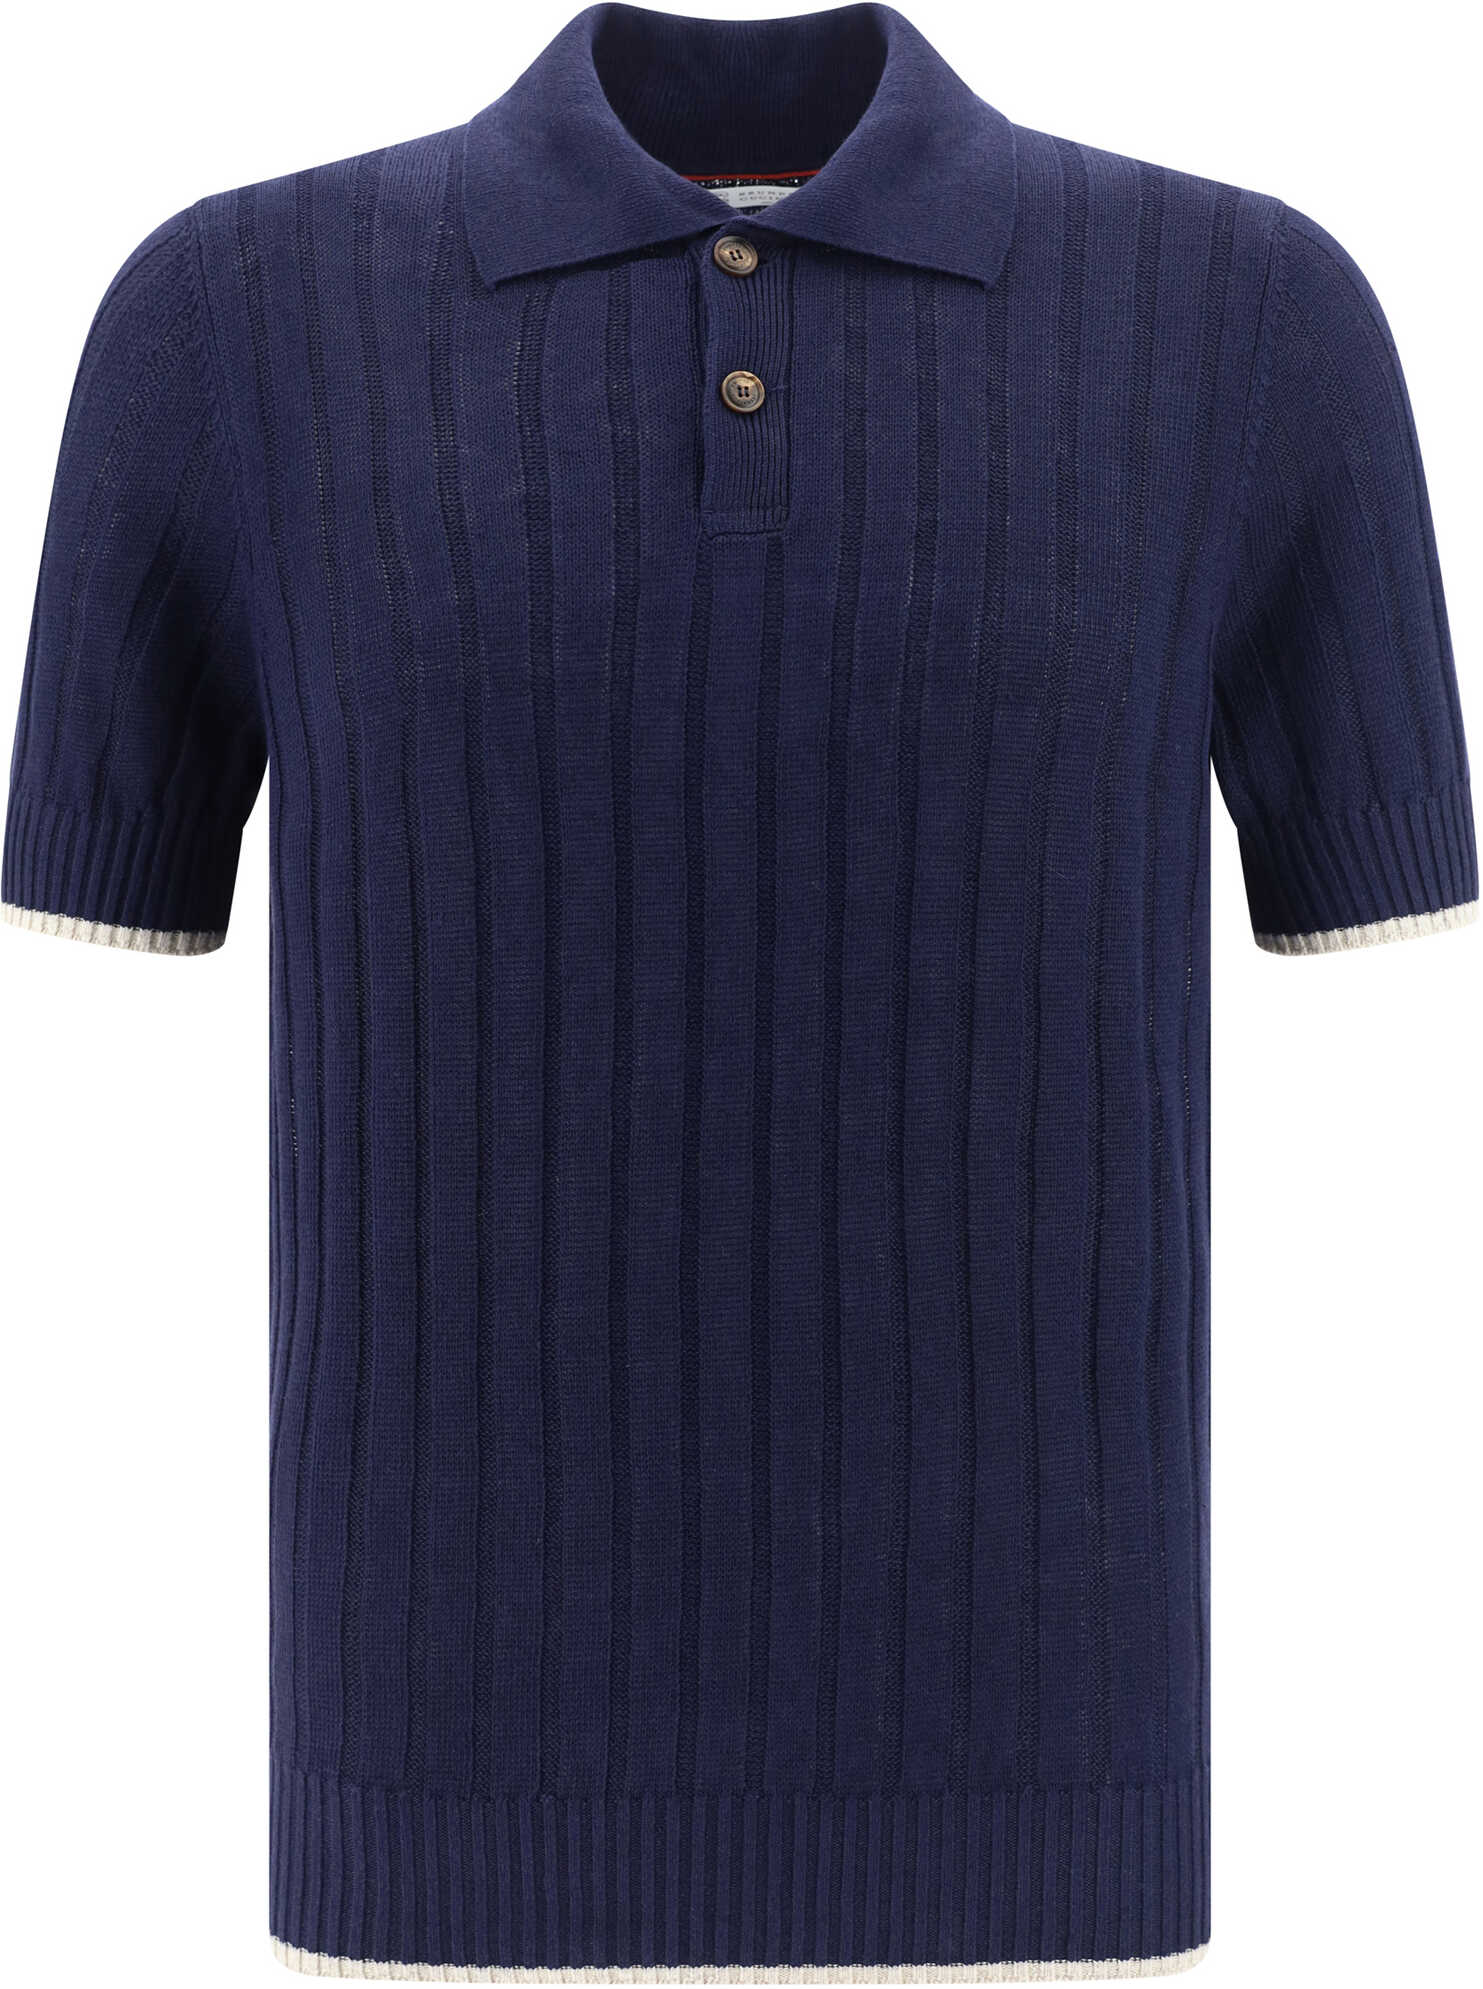 Brunello Cucinelli Polo Shirt NAVY+OYSTER